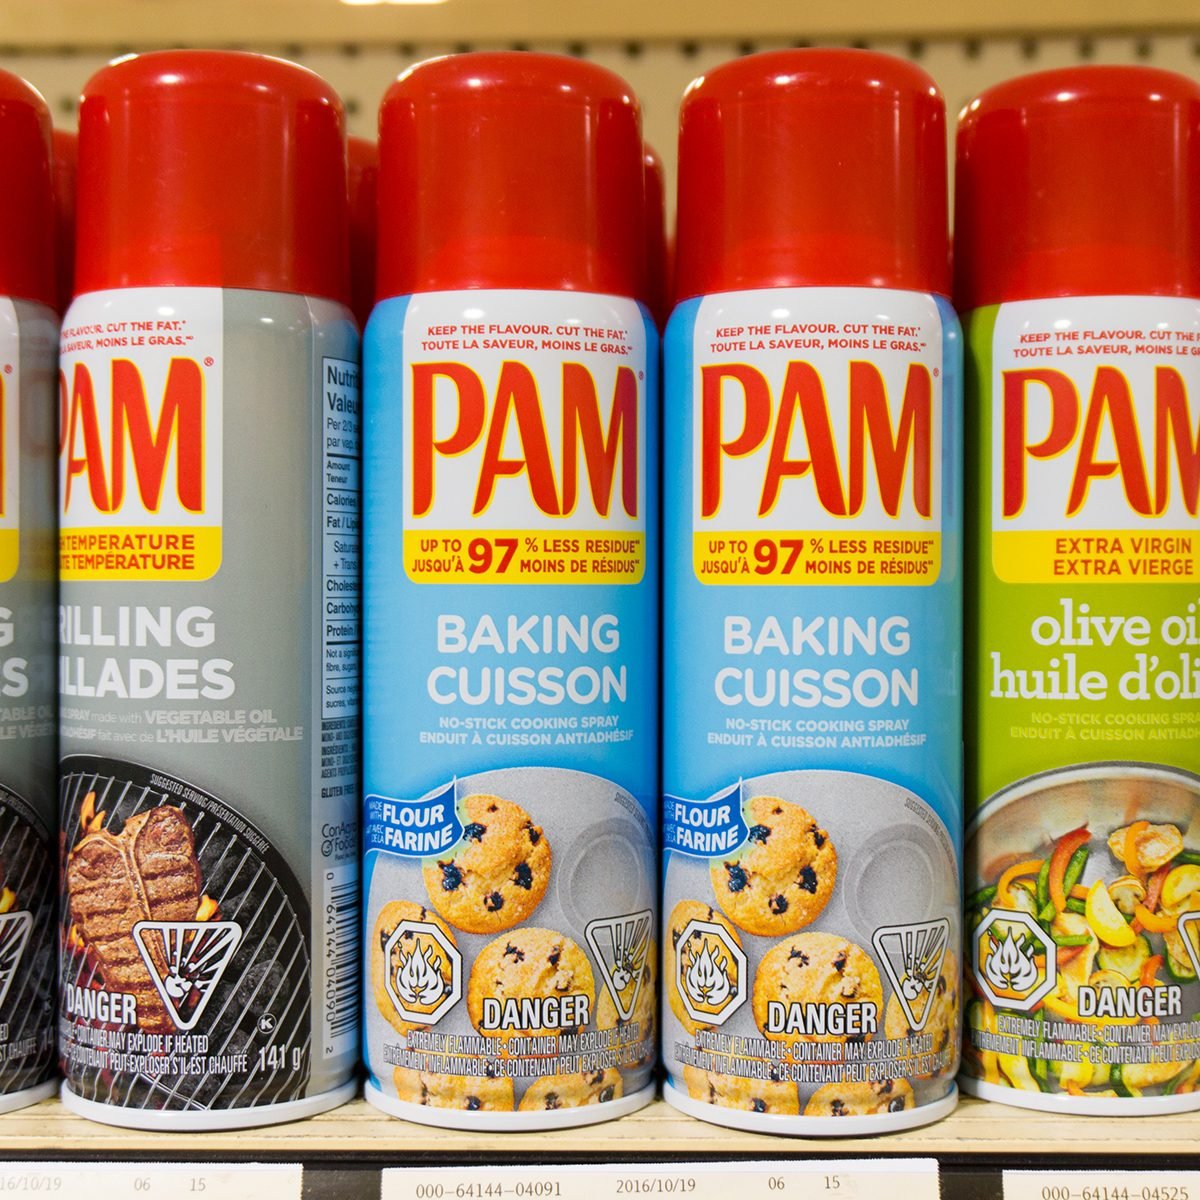 https://www.tasteofhome.com/wp-content/uploads/2020/07/cooking-sprays-in-store-shelf-pam-is-a-brand-name-629290546.jpg